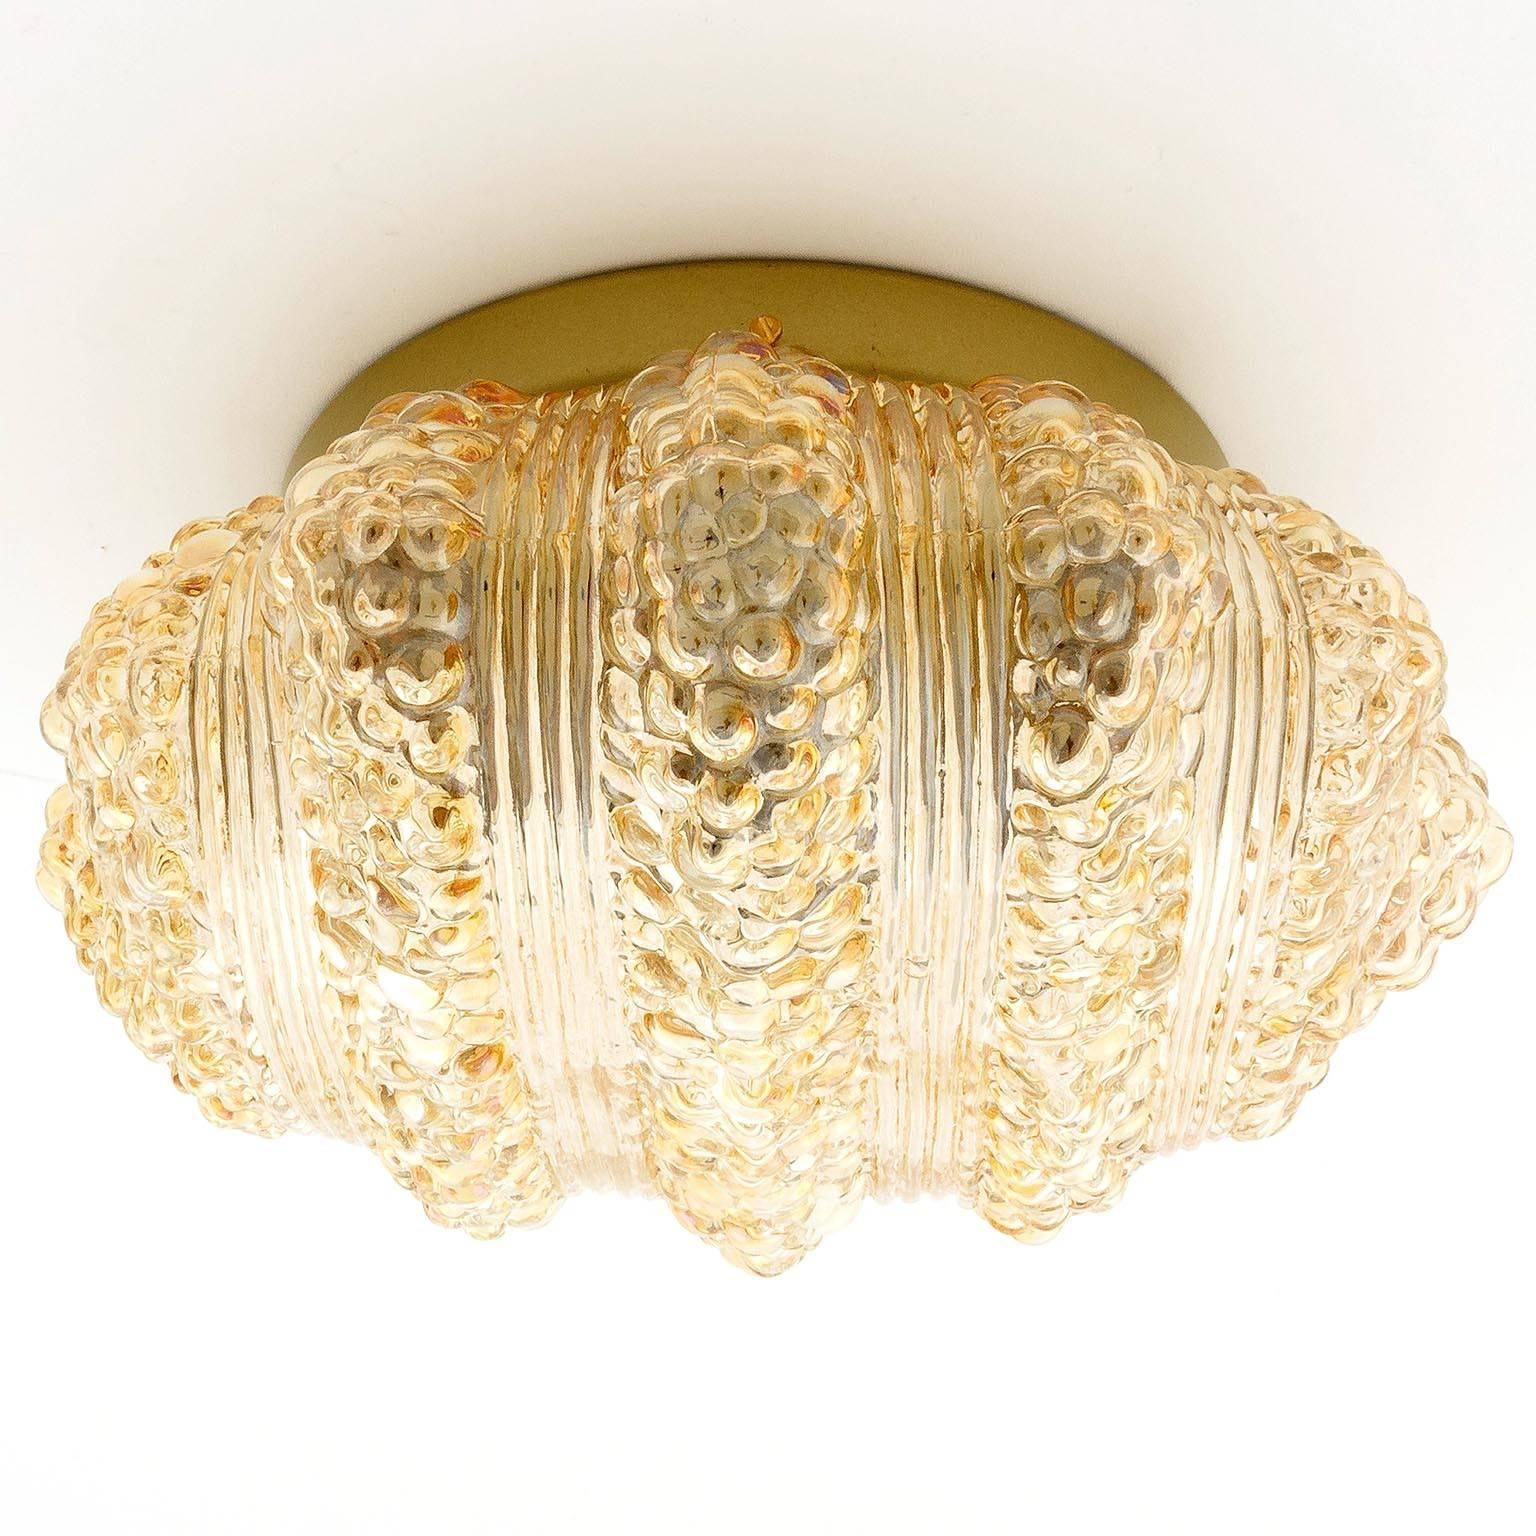 Painted Three Sconces or Flush Mount Lights, Amber Tone Bubble Glass, 1960s